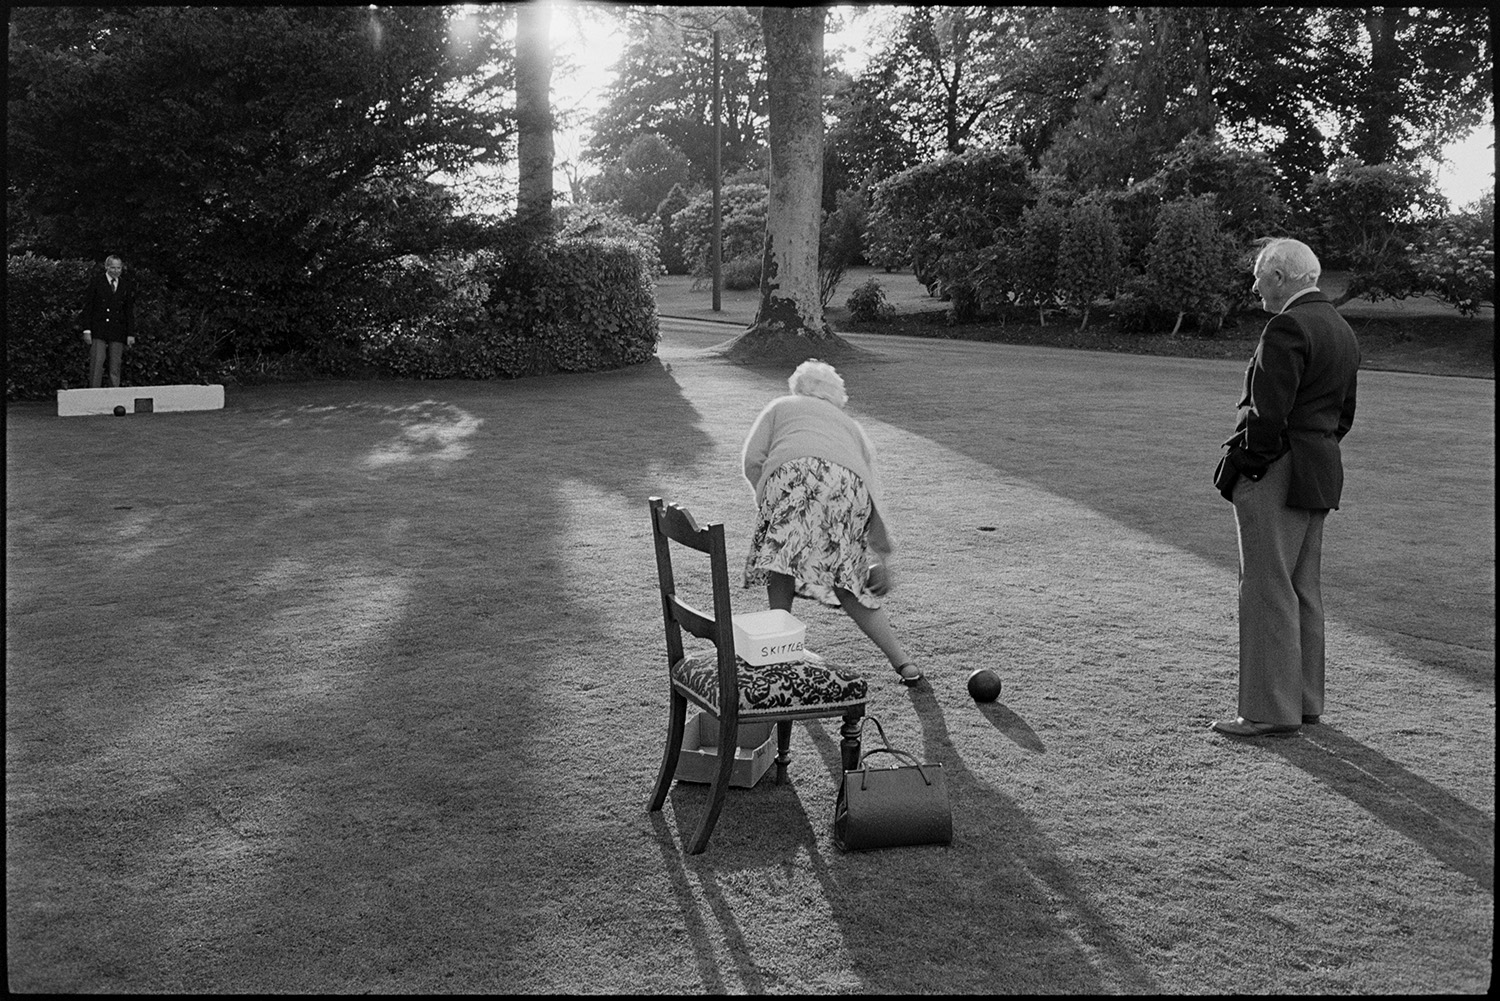 Sideshows at garden fete, bowls, hoop la, billiards, golf. 
[A man and woman playing bowls on the lawn at a fete at the Old Rectory, Merton. Shadows from trees are falling onto the grass.]